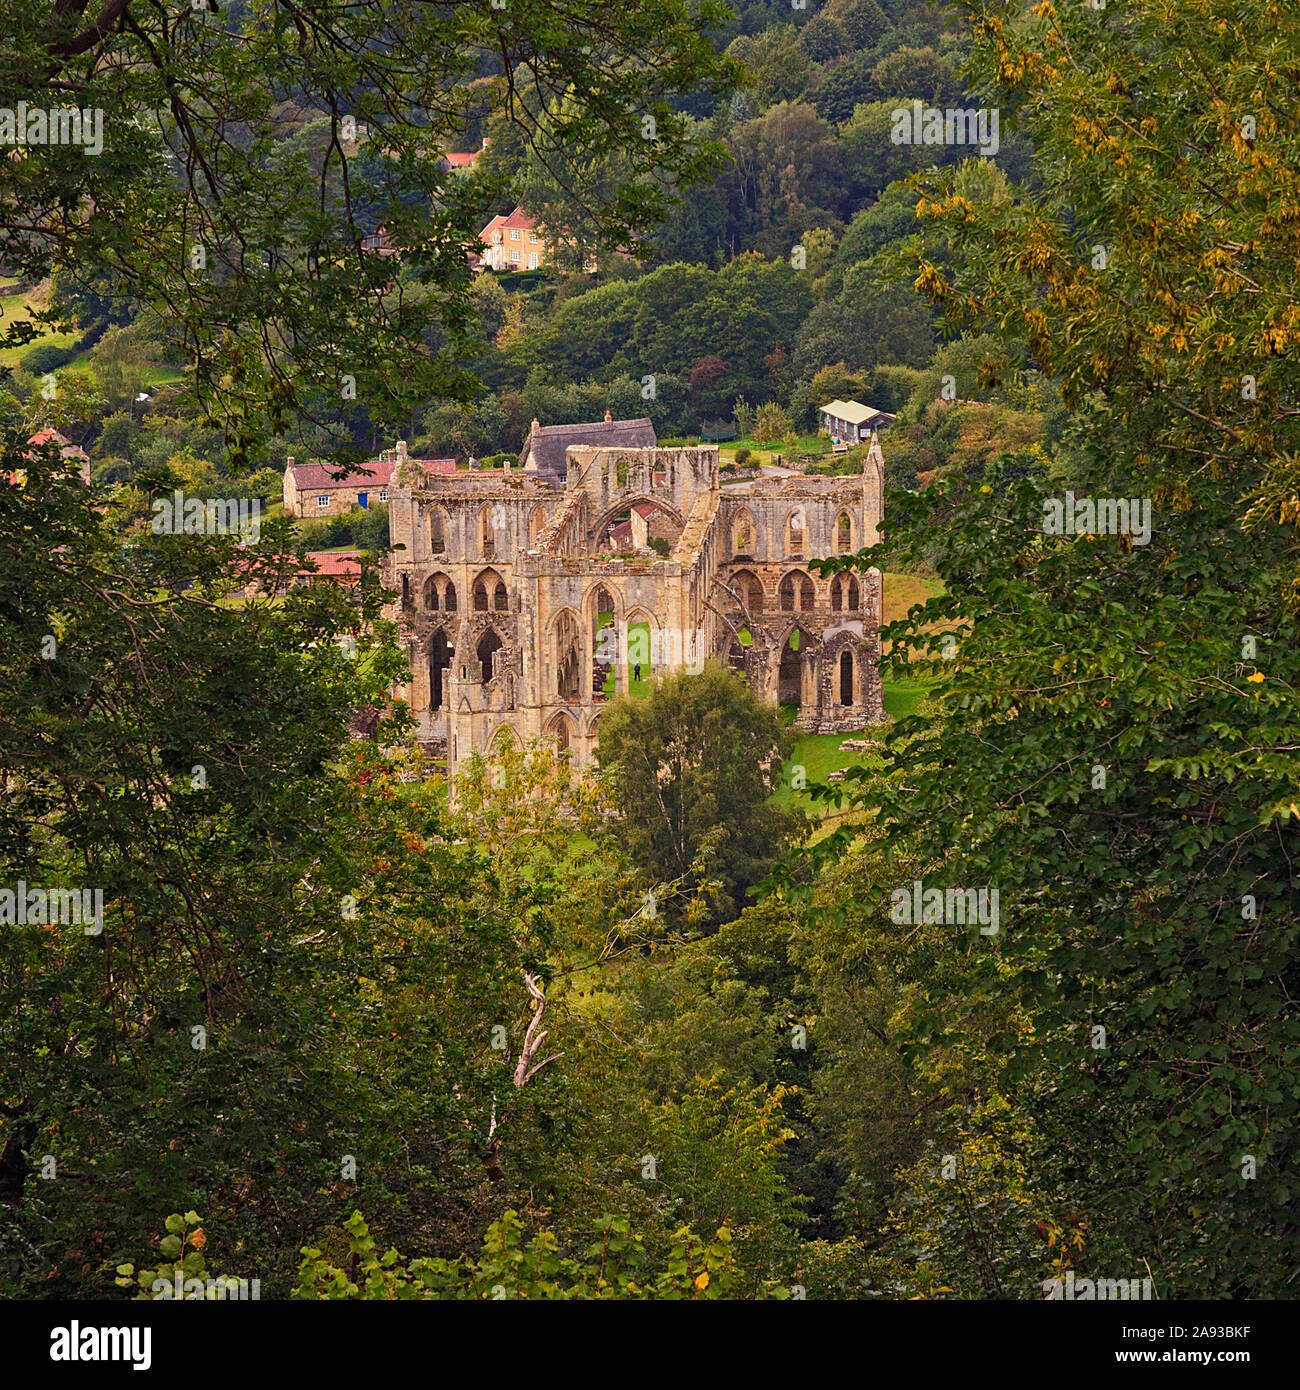 Rievaulx Abbey viewed from Rievaulx Terrace, Ryedale, North Yorkshire Moors, UK Abbey Stock Photo